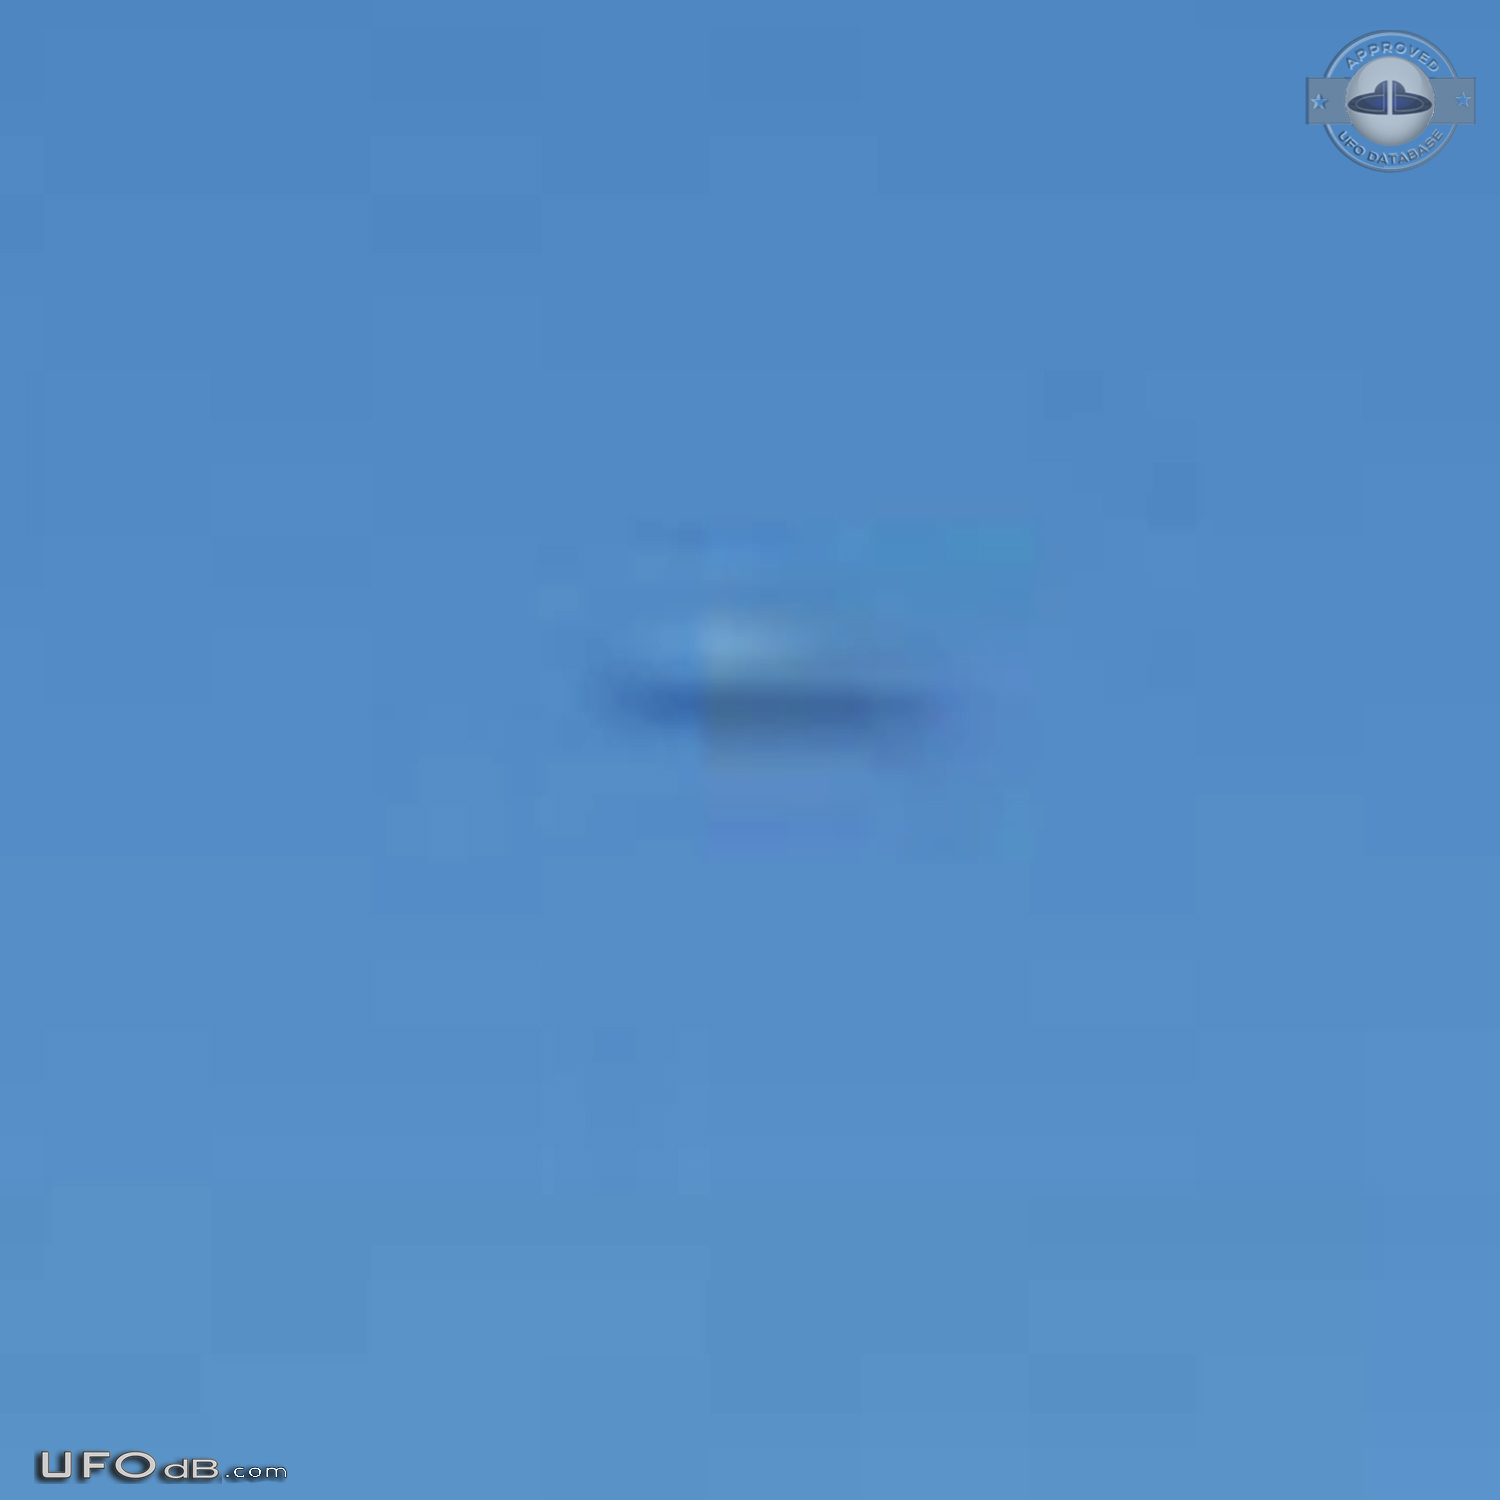 Object captured when taking photo at NATO base site Kandahar Afghanist UFO Picture #748-5